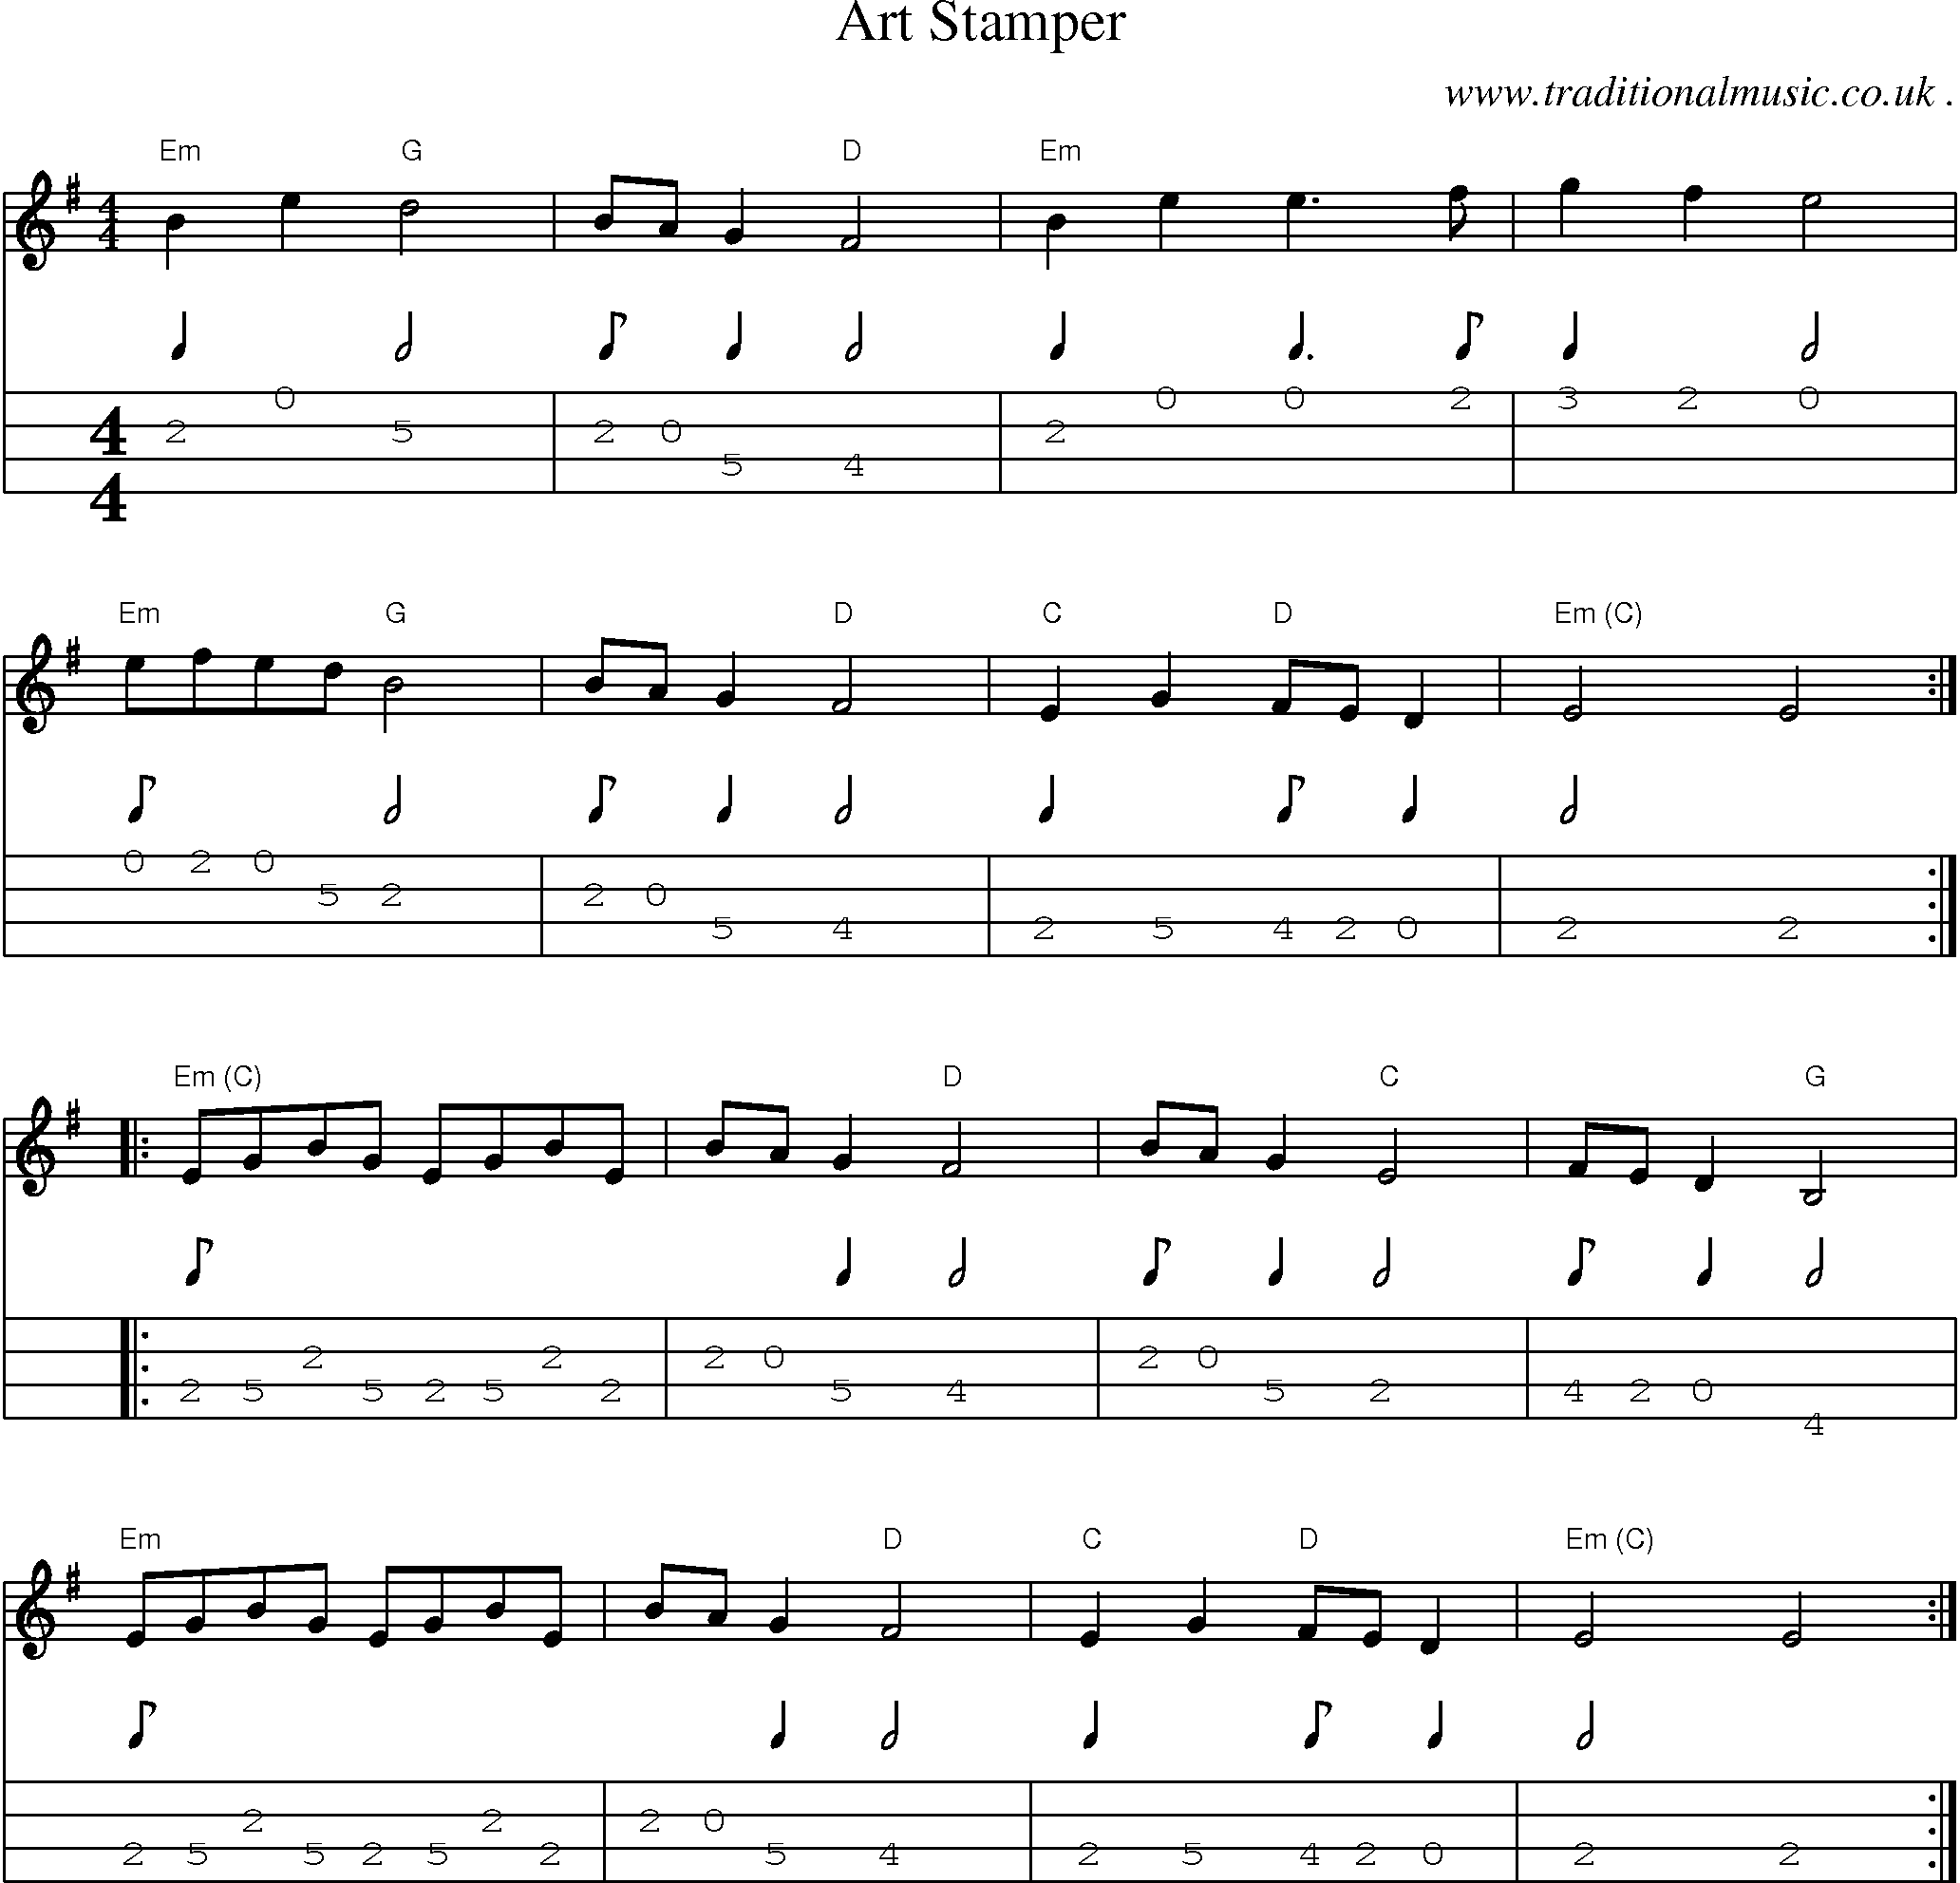 Music Score and Guitar Tabs for Art Stamper